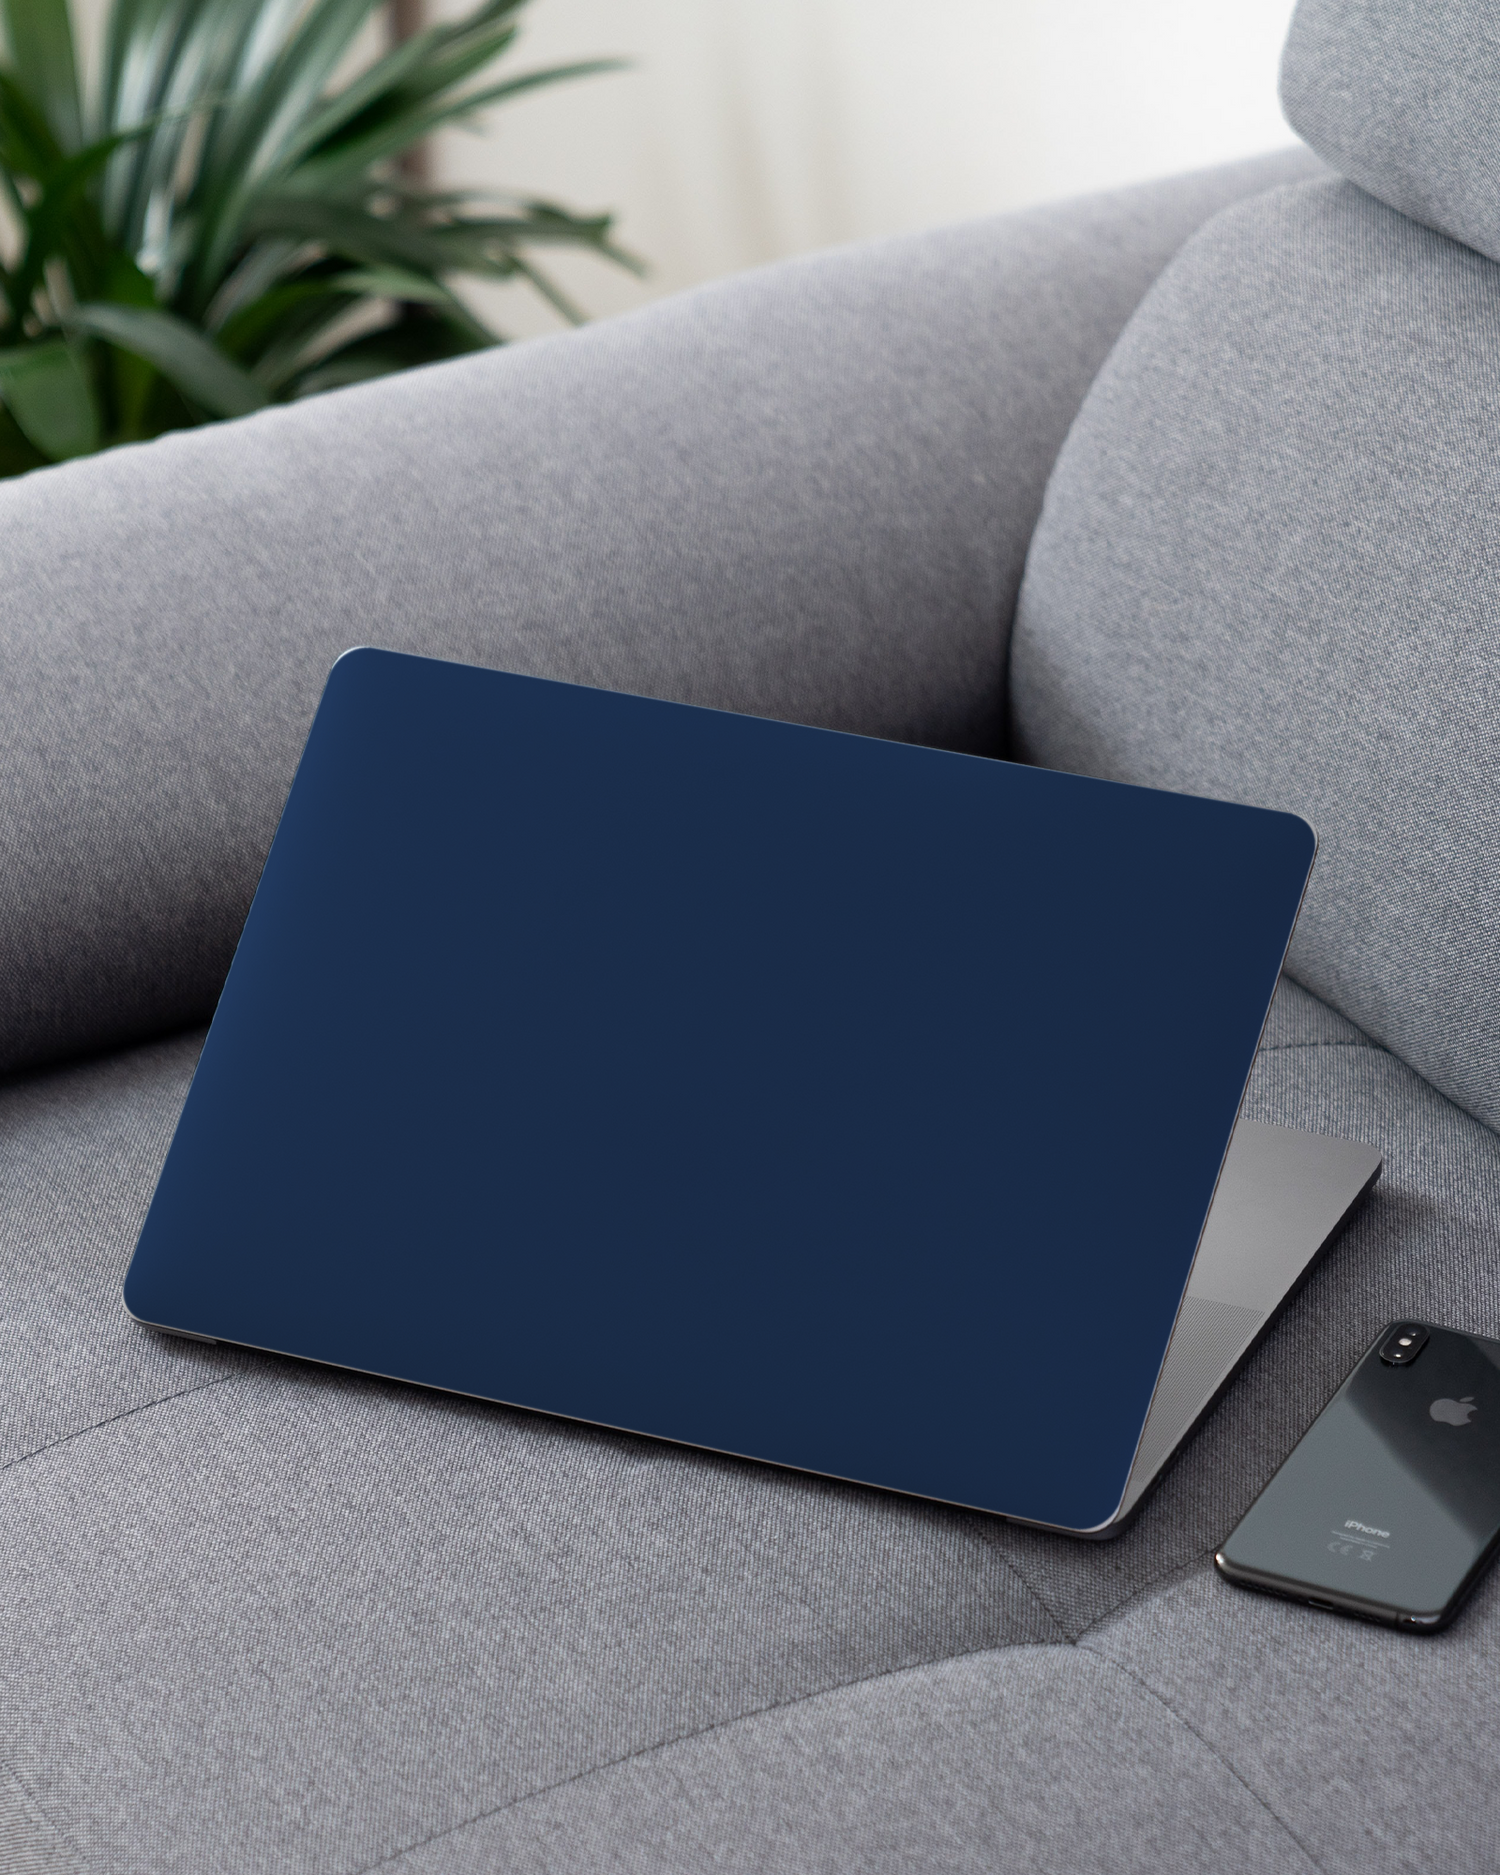 NAVY Laptop Skin for 13 inch Apple MacBooks on a couch